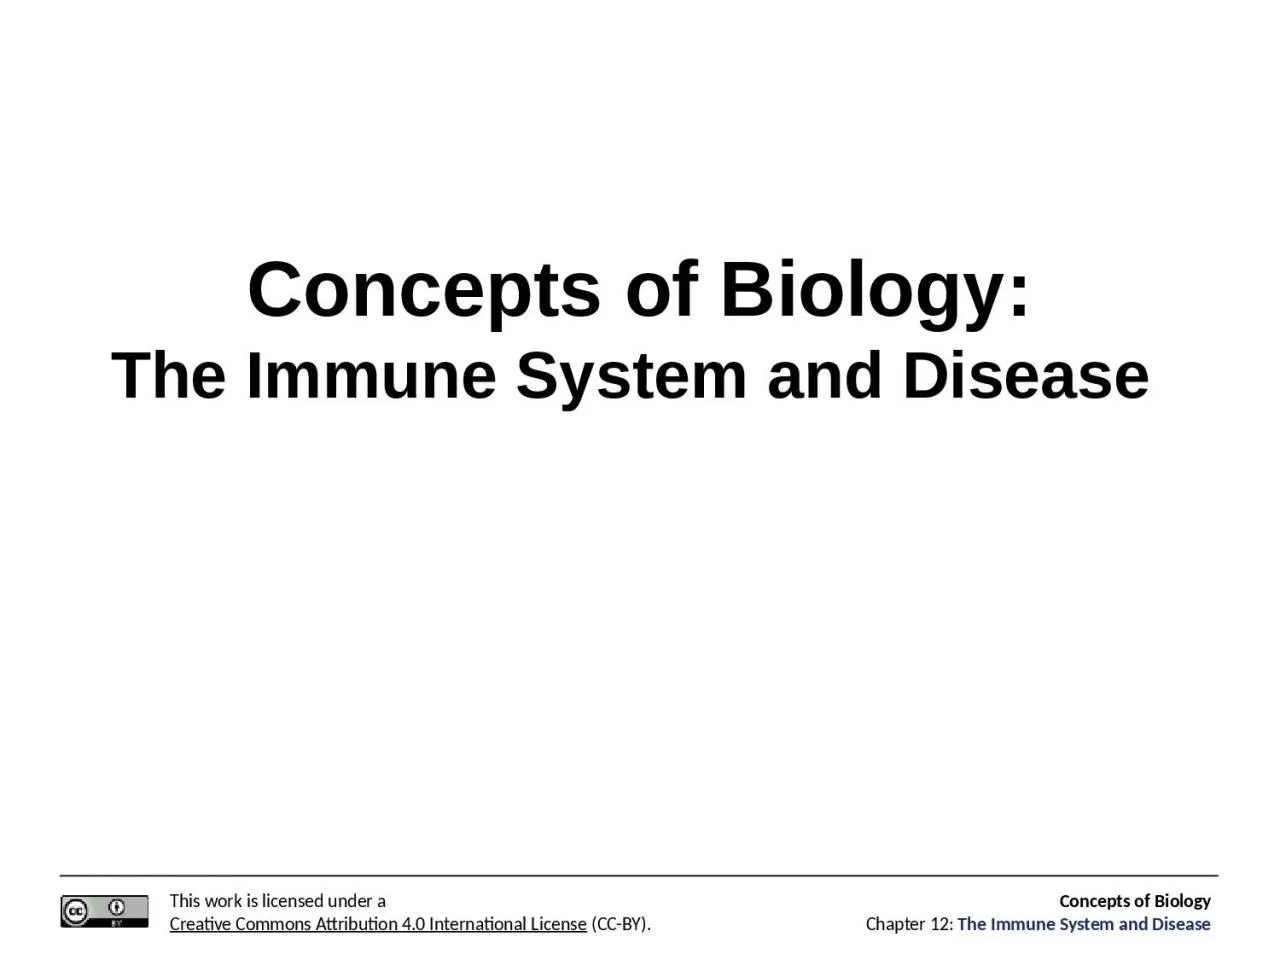 Concepts of Biology: The Immune System and Disease